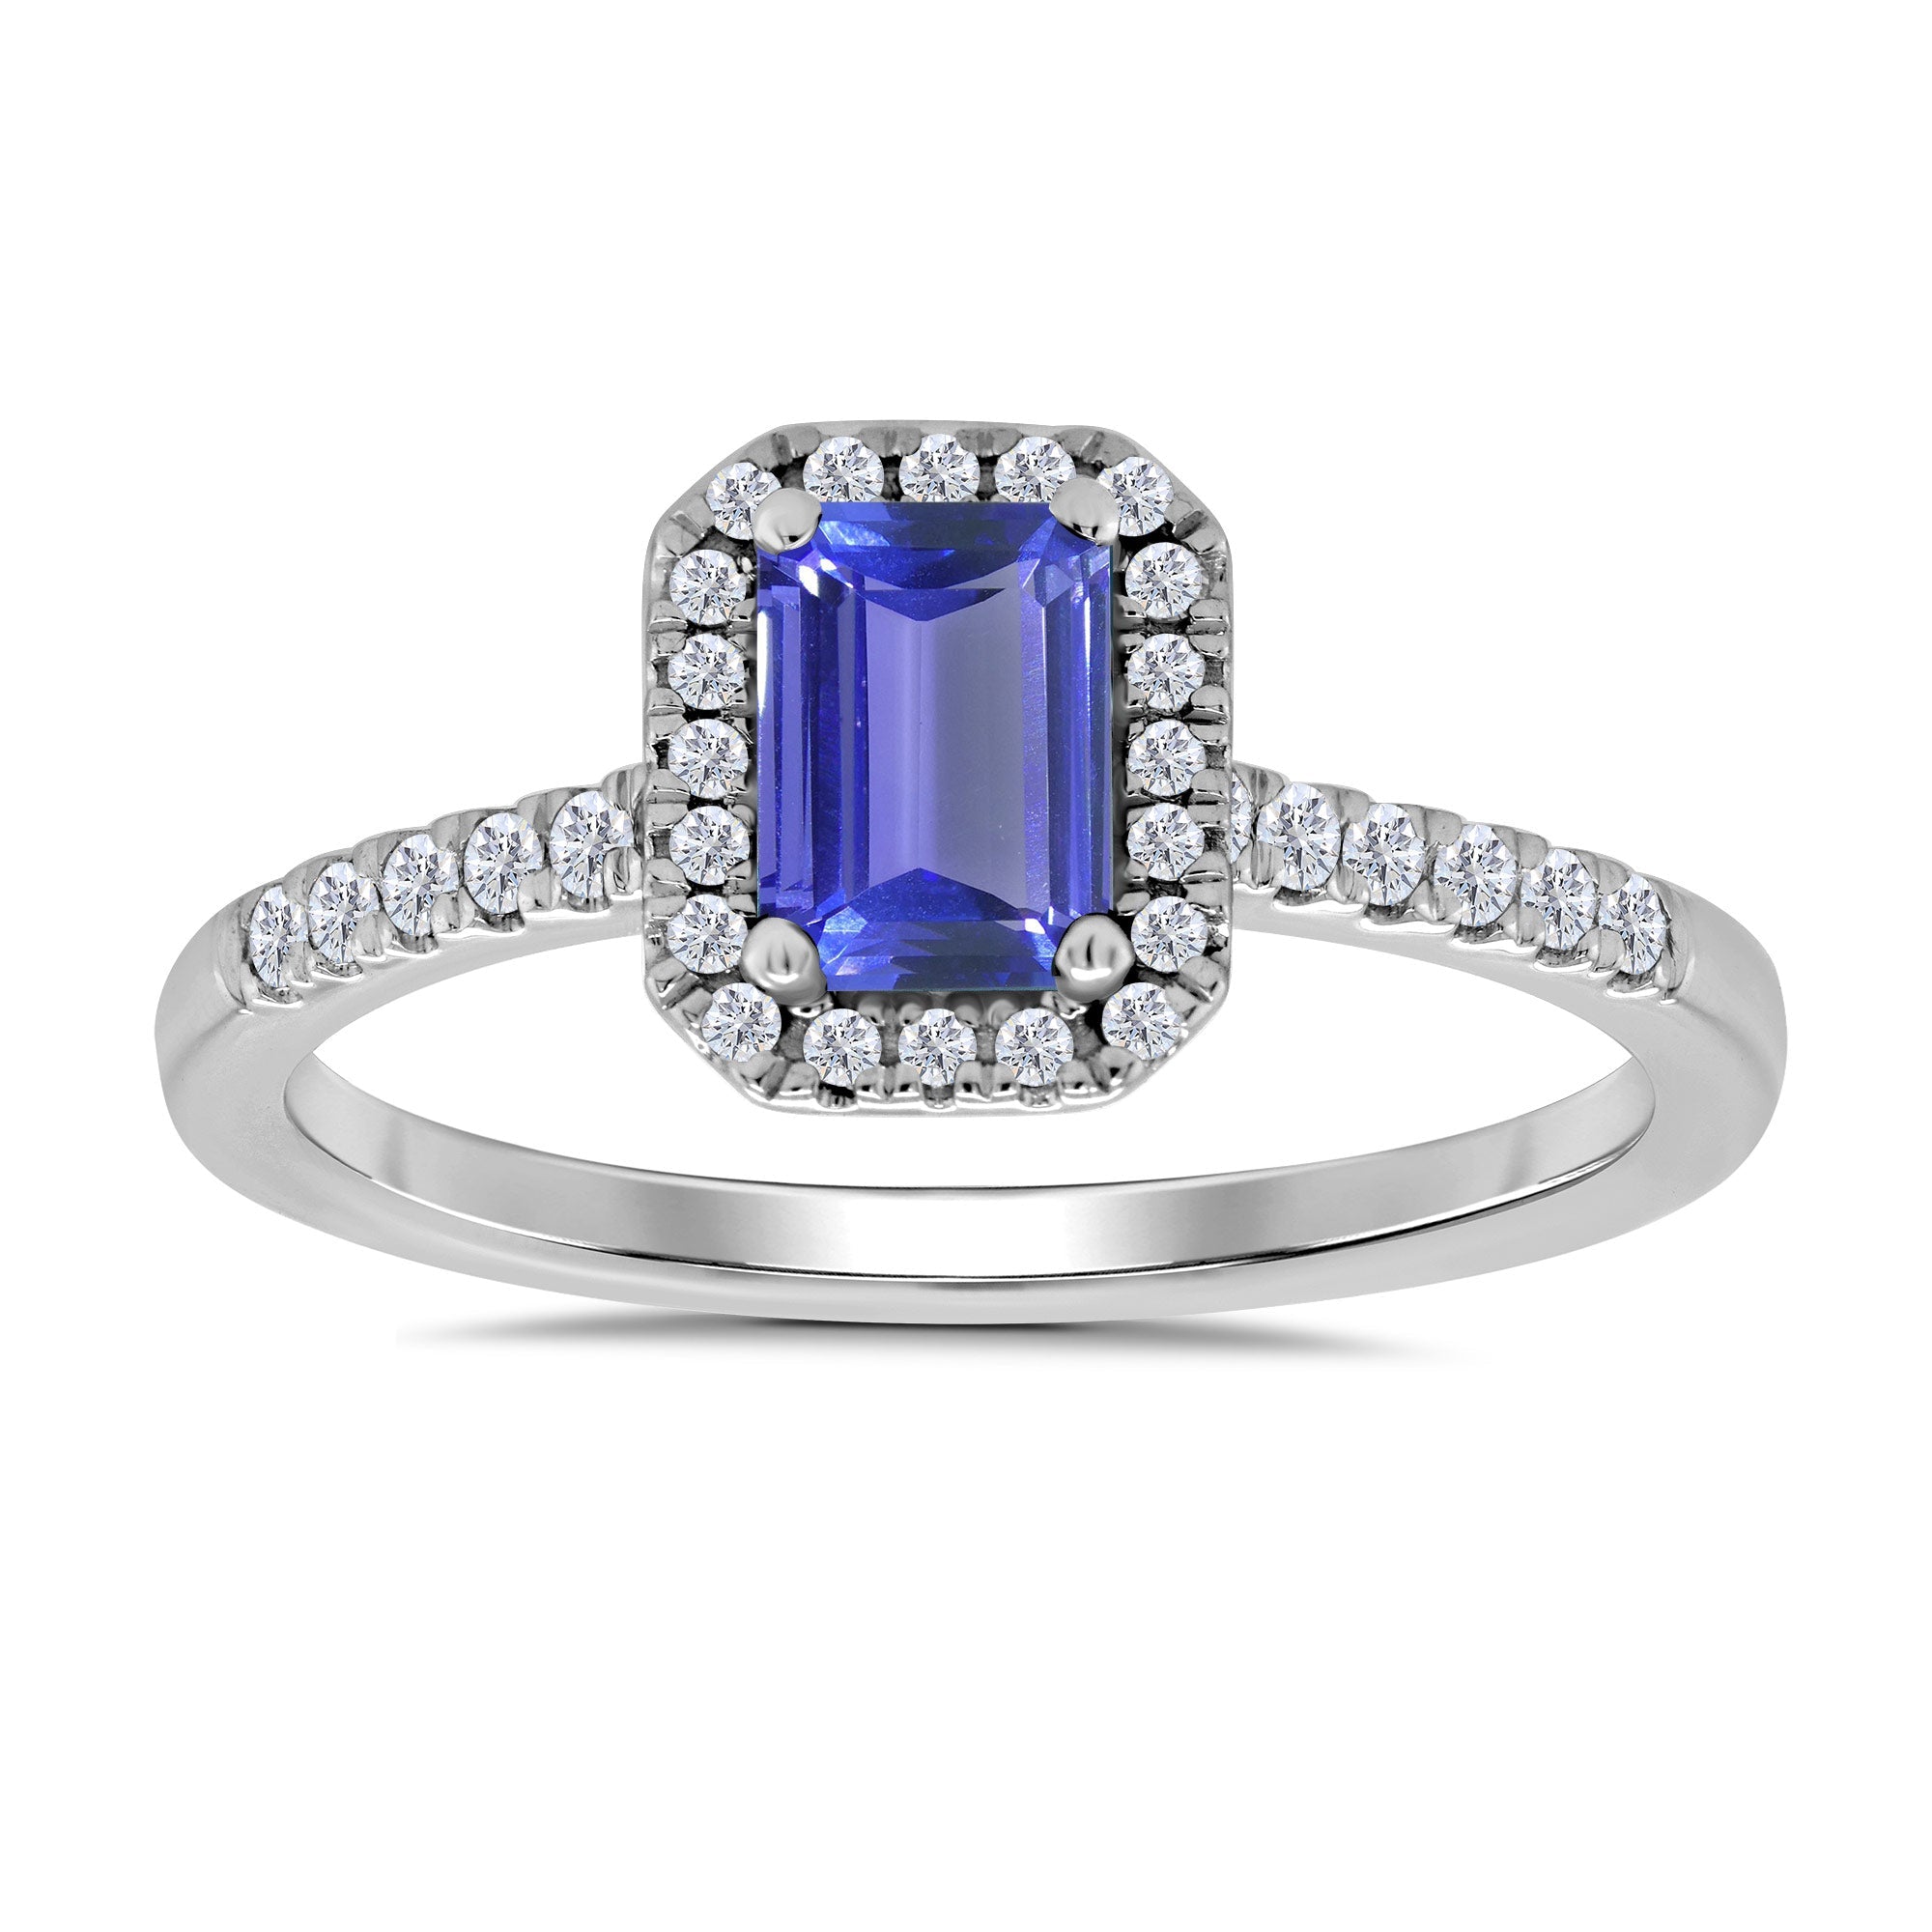 9ct white gold 6x4mm octagon tanzanite & diamond cluster ring with diamond set shoulders 0.20ct